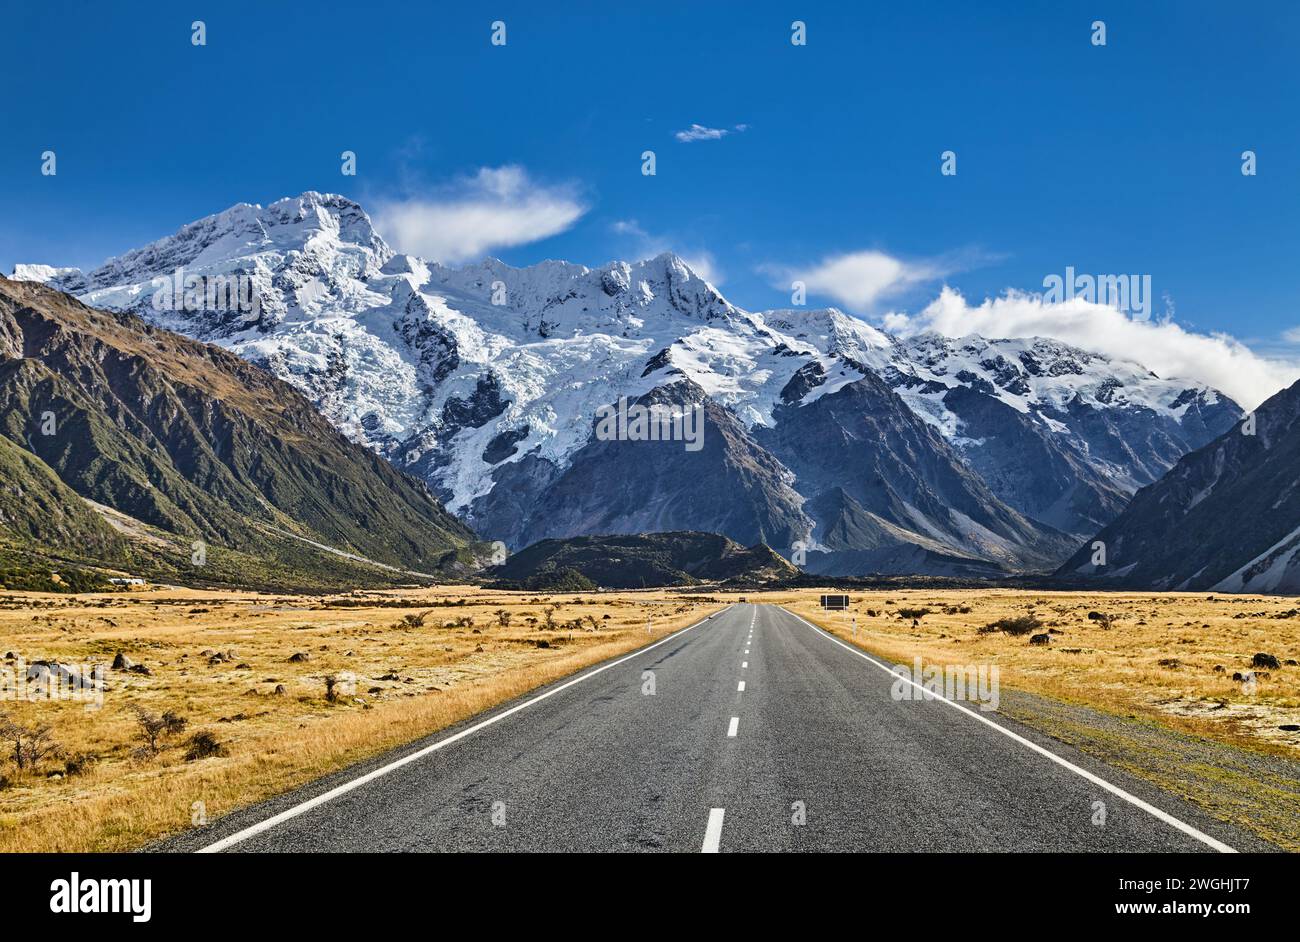 Mount Sefton the part of Southern Alps in Mount Cook National Park, South Island, New Zealand Stock Photo